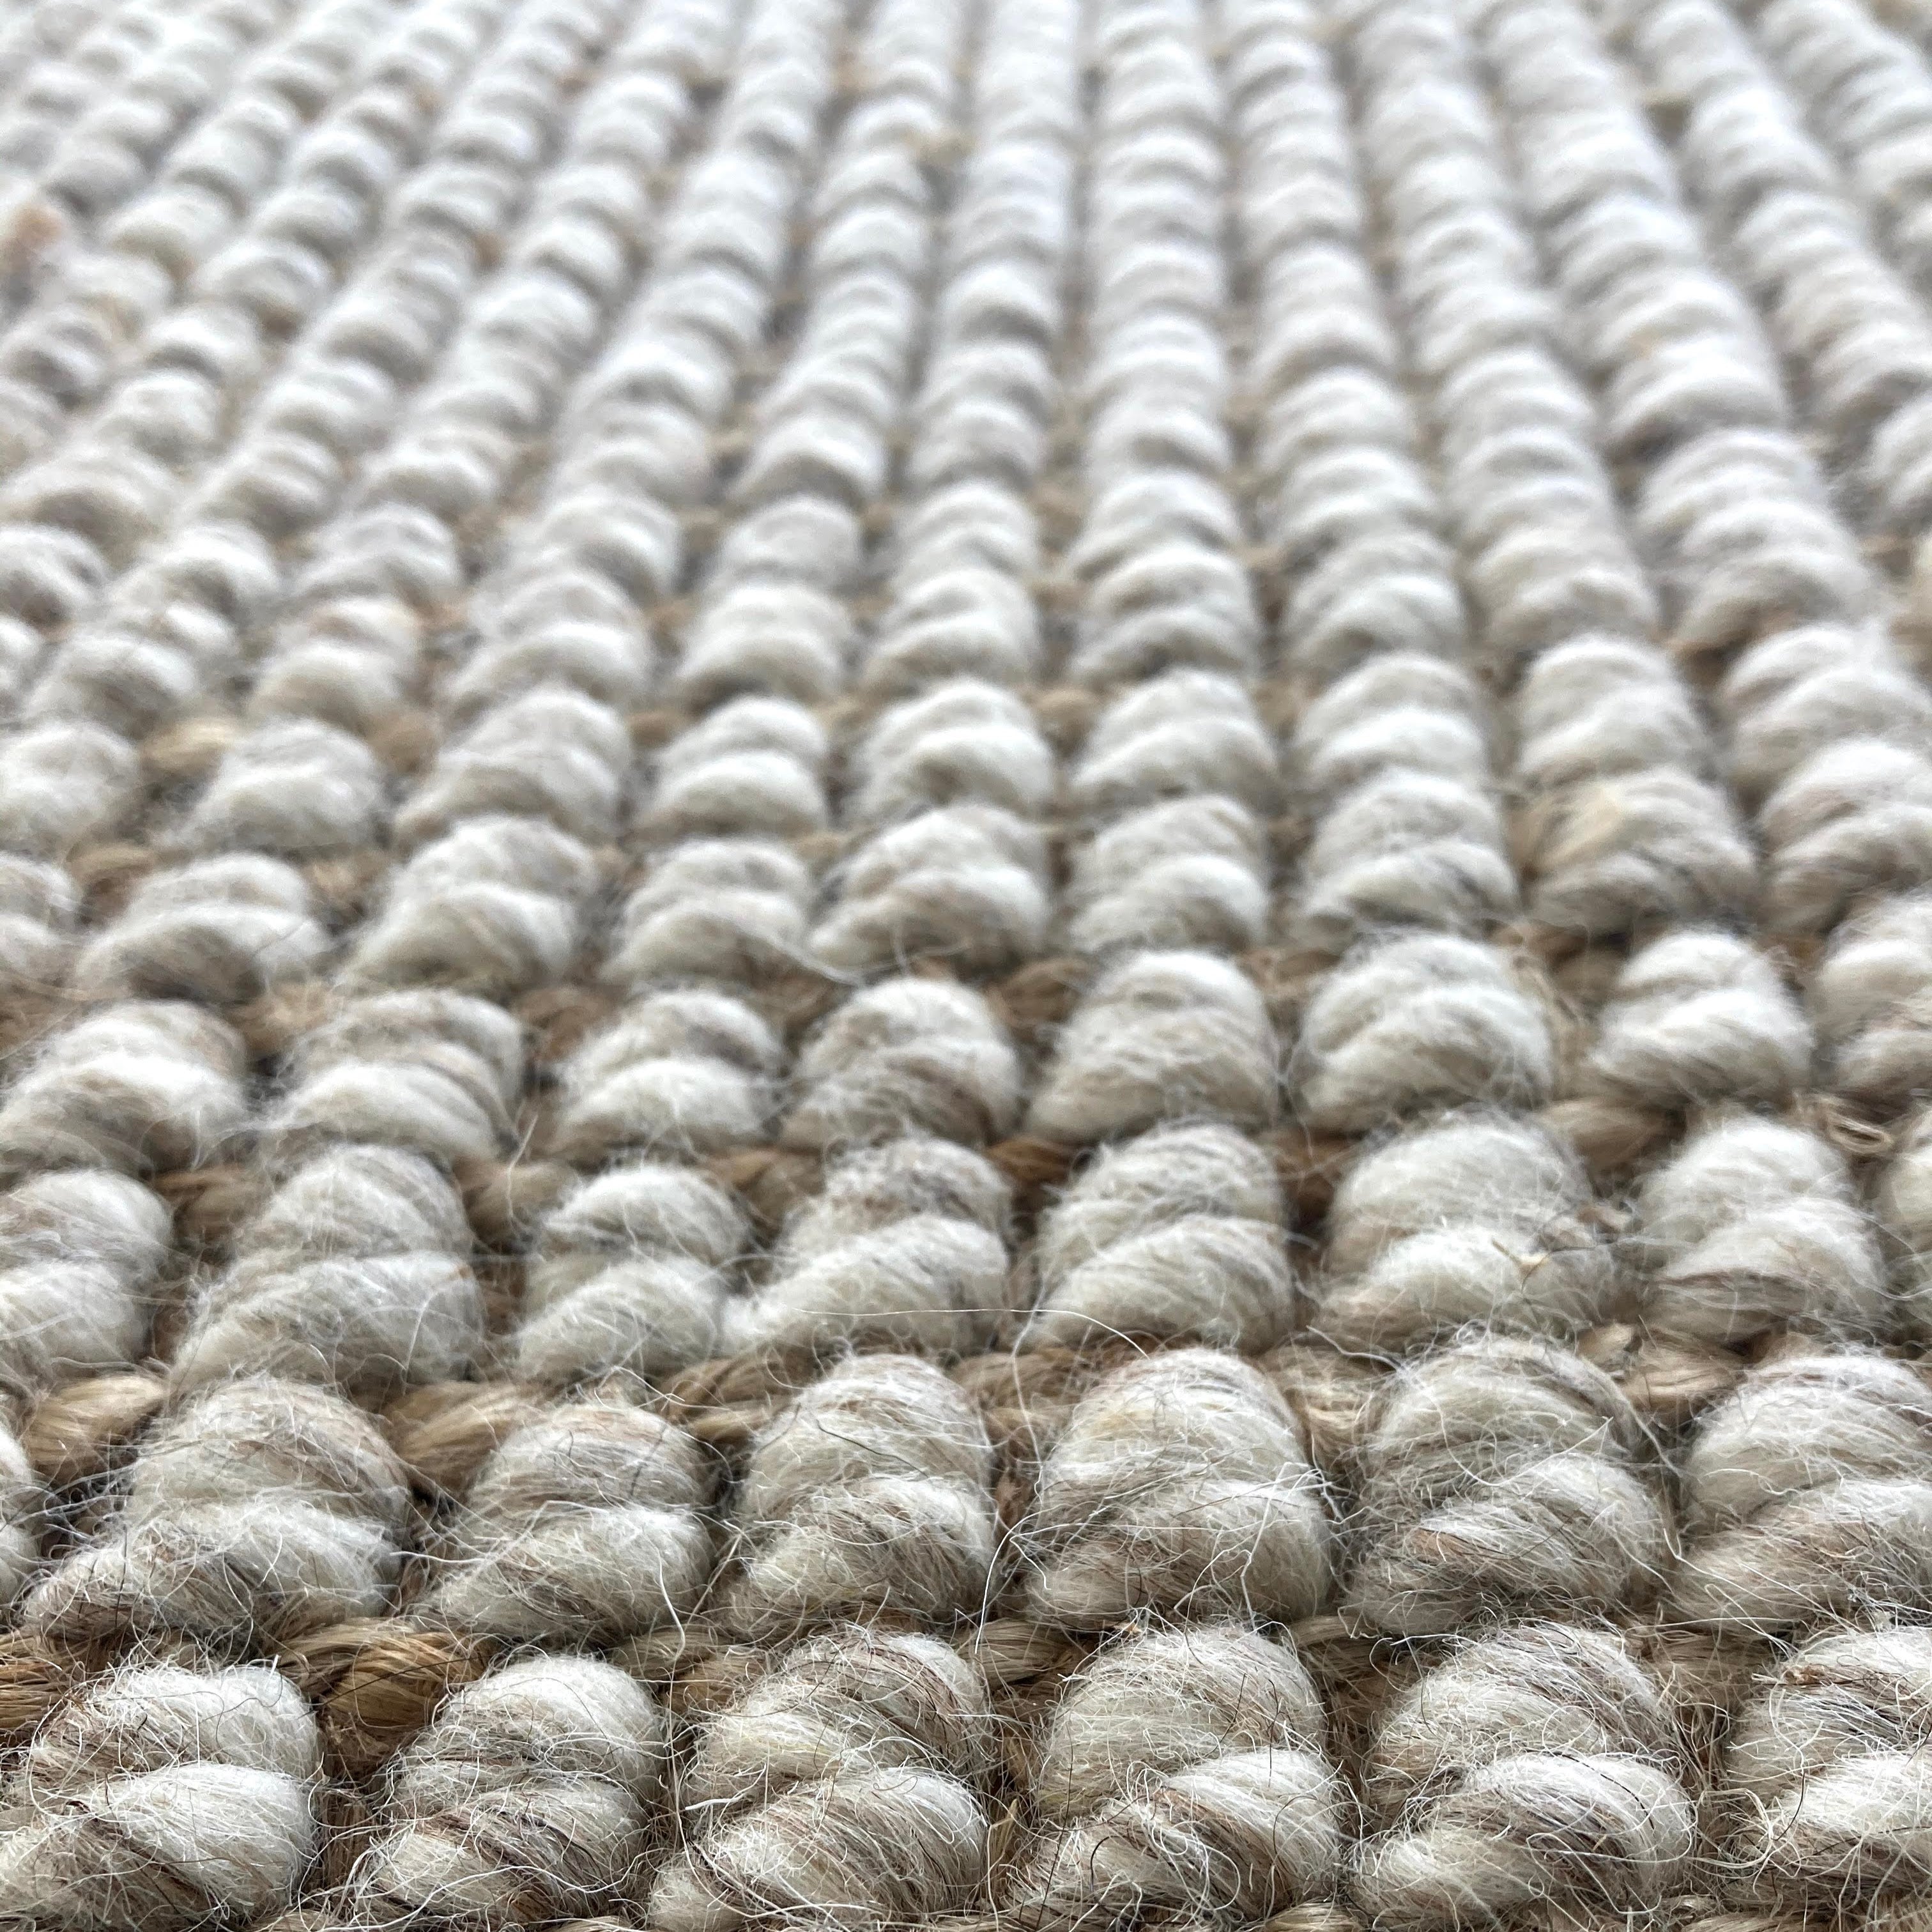 Wool Rugs and Runners – Natural Rugs Australia